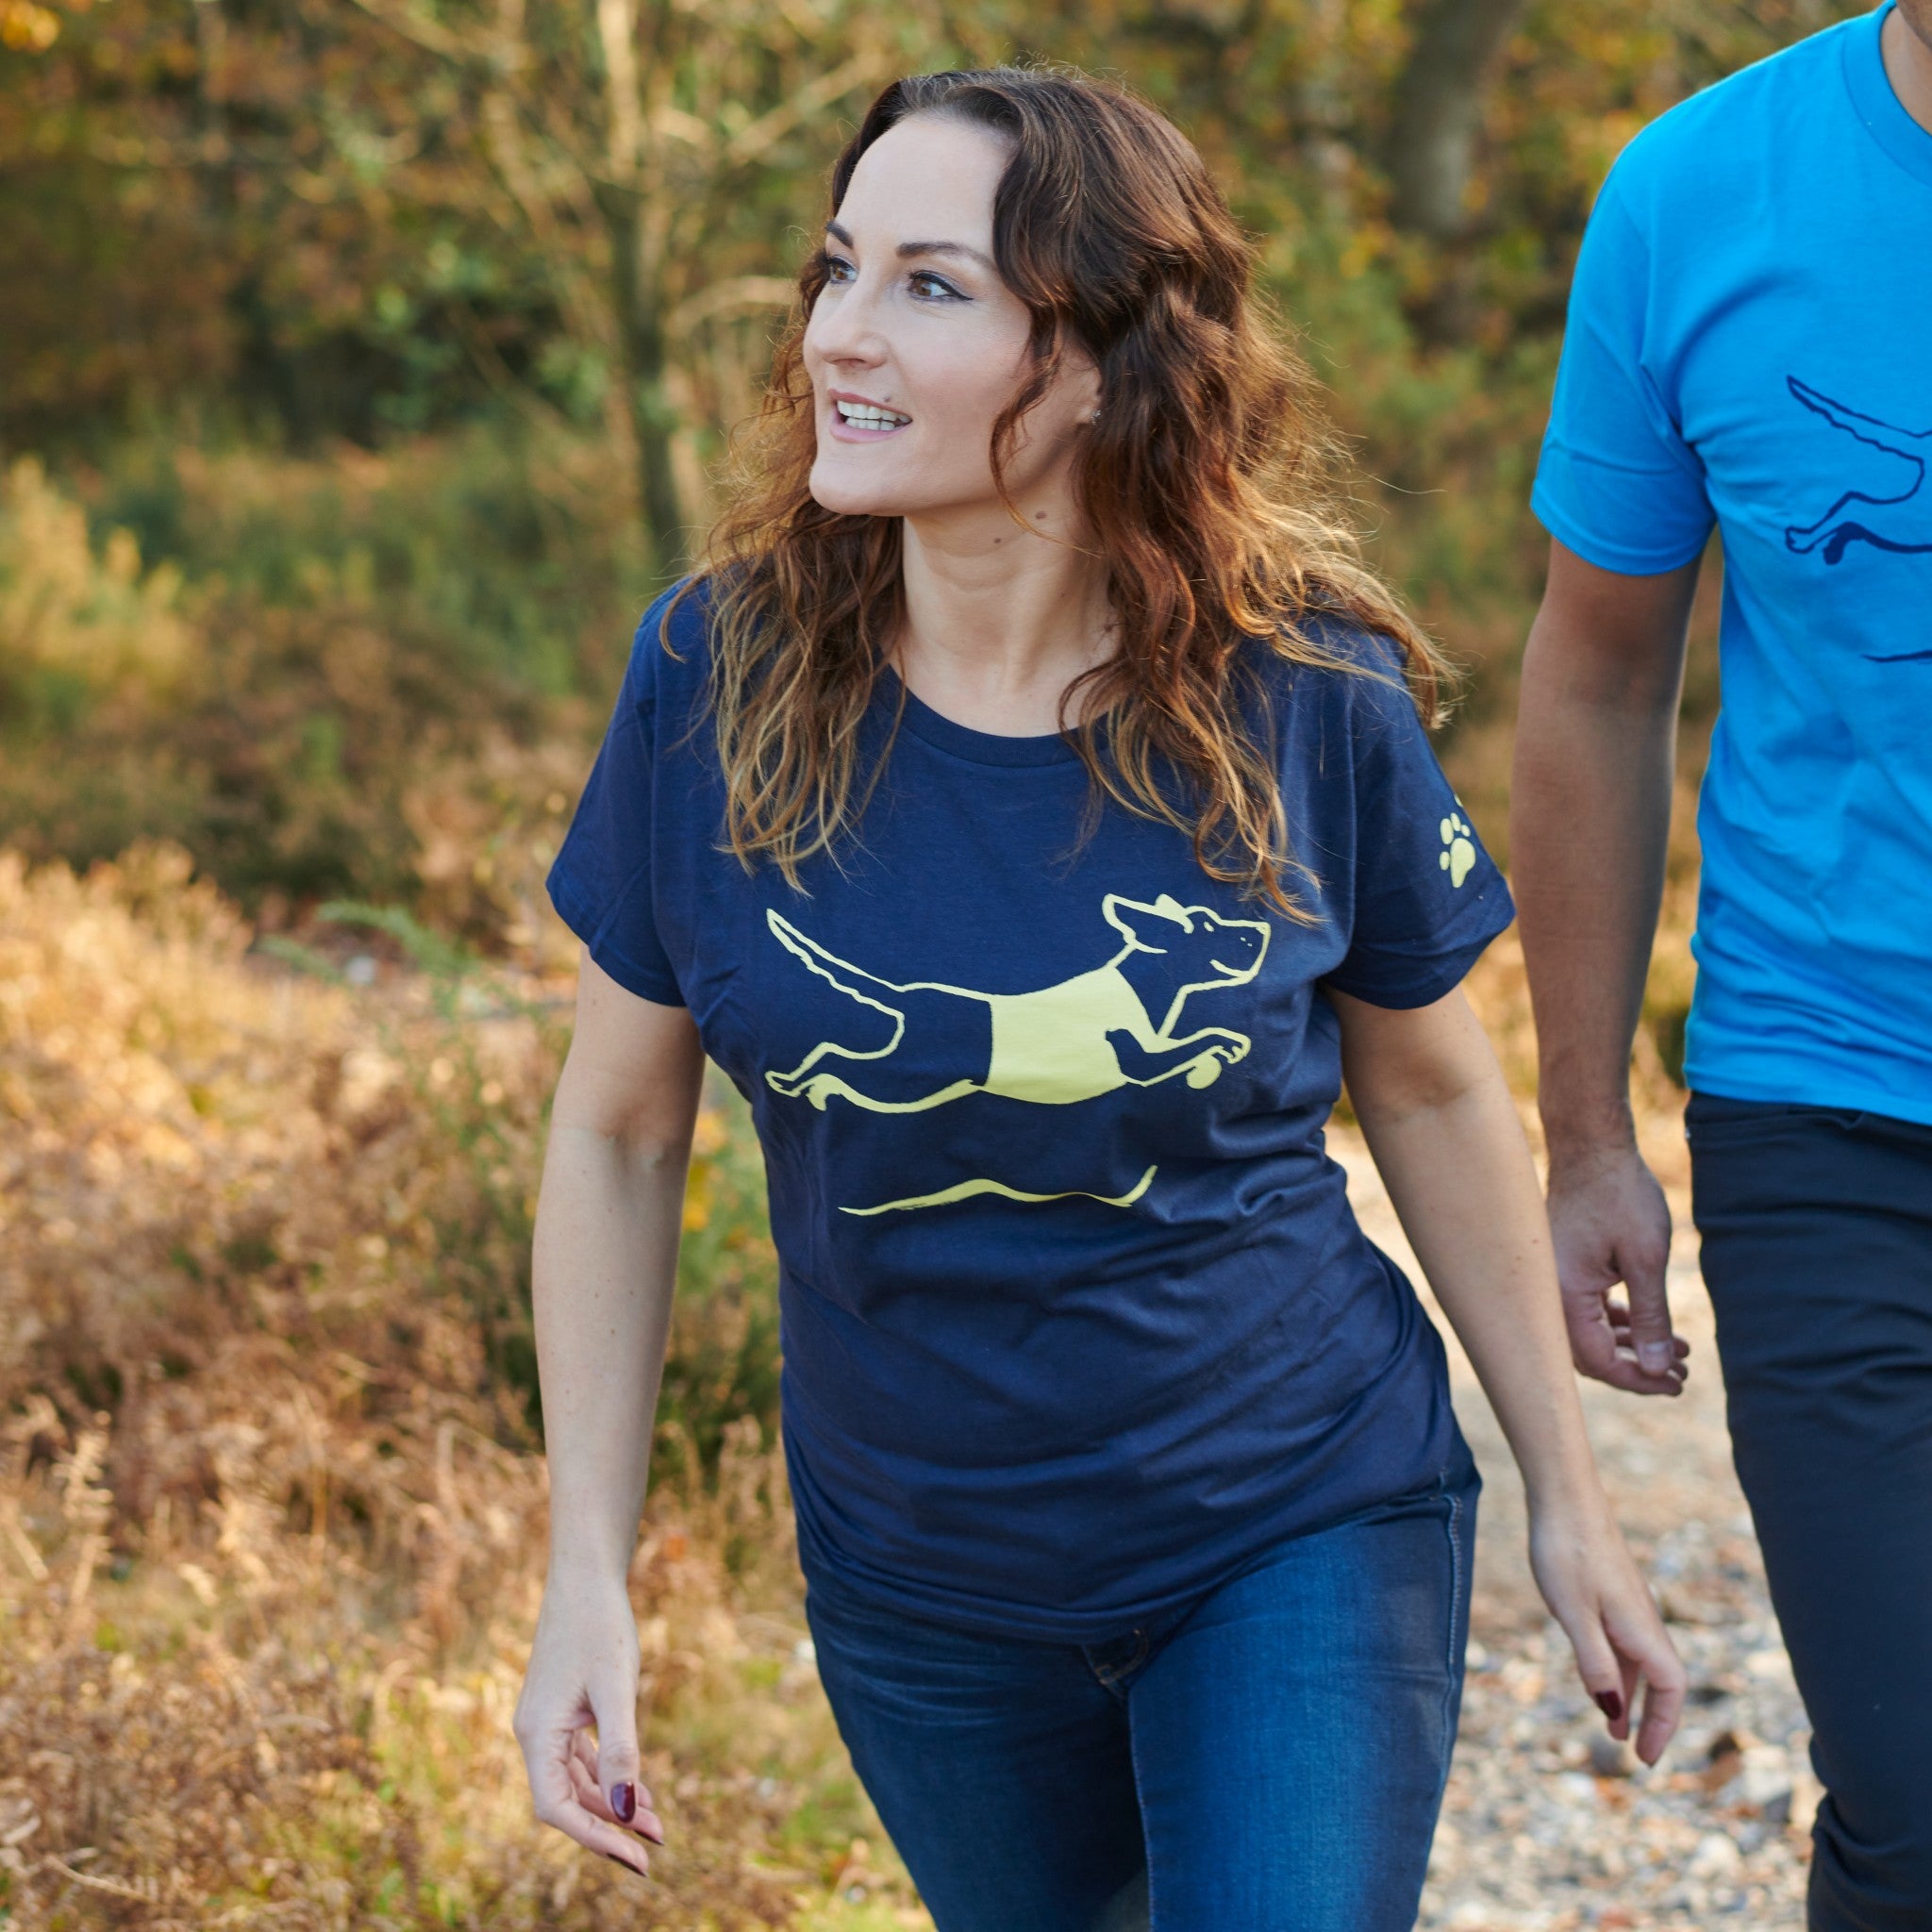 A lady with brown hair wears a navy tshirt with a leaping dog printed on the front and the Guide Dogs logo on the arm, both in yellow.